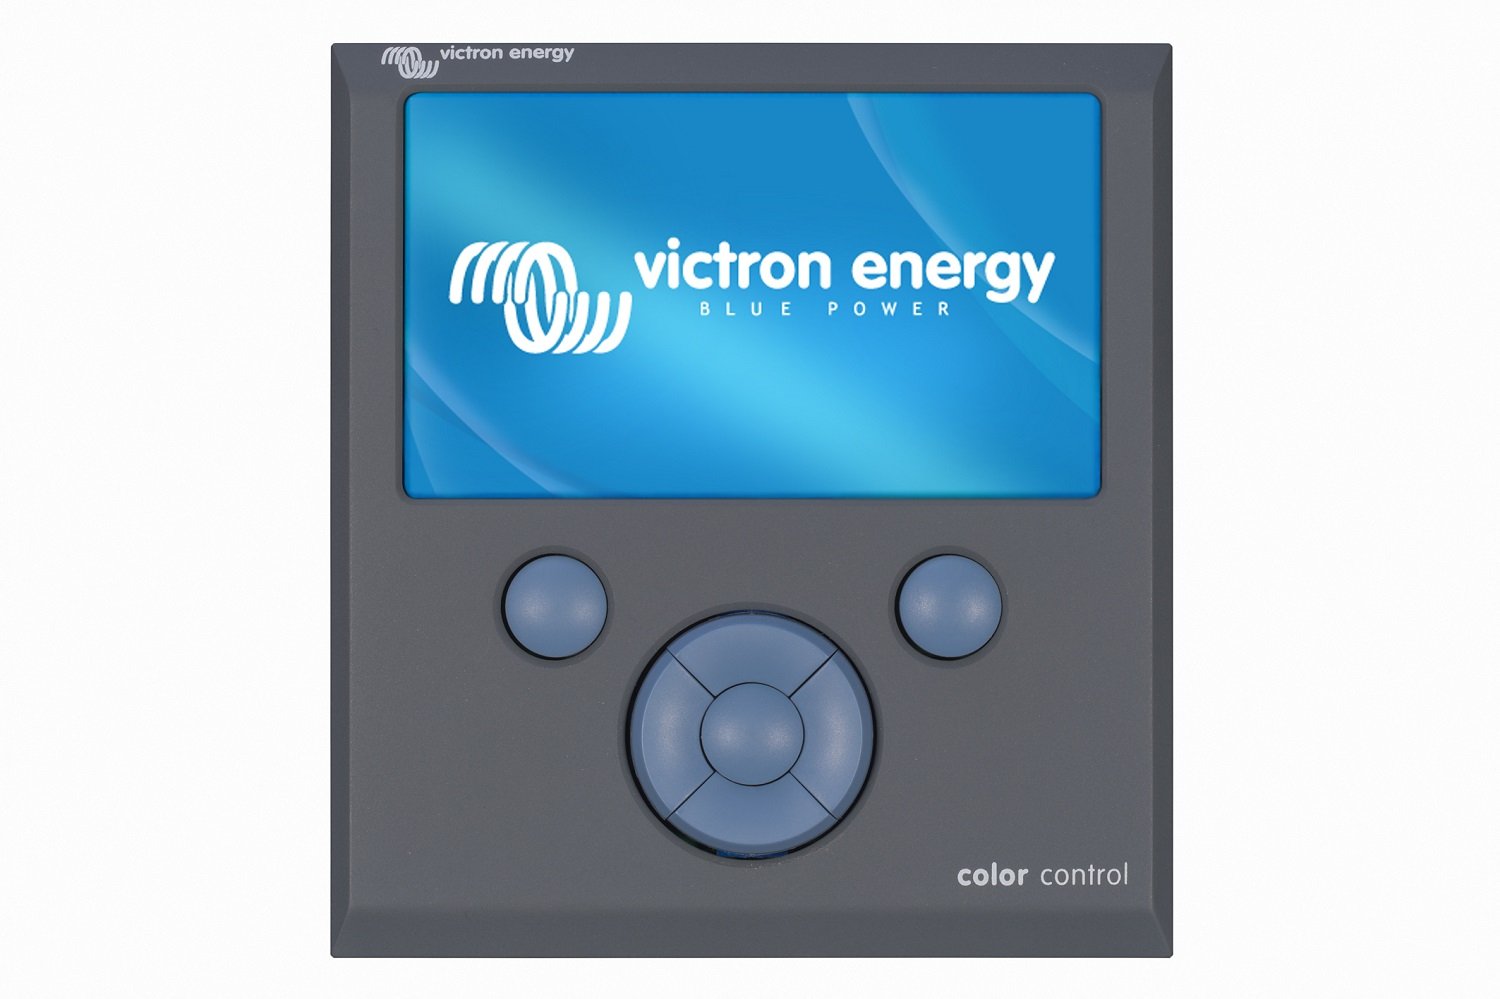 Can the Color Control GX be used instead of a Victron Multi Control GX to control a Multiplus inverter/charger?